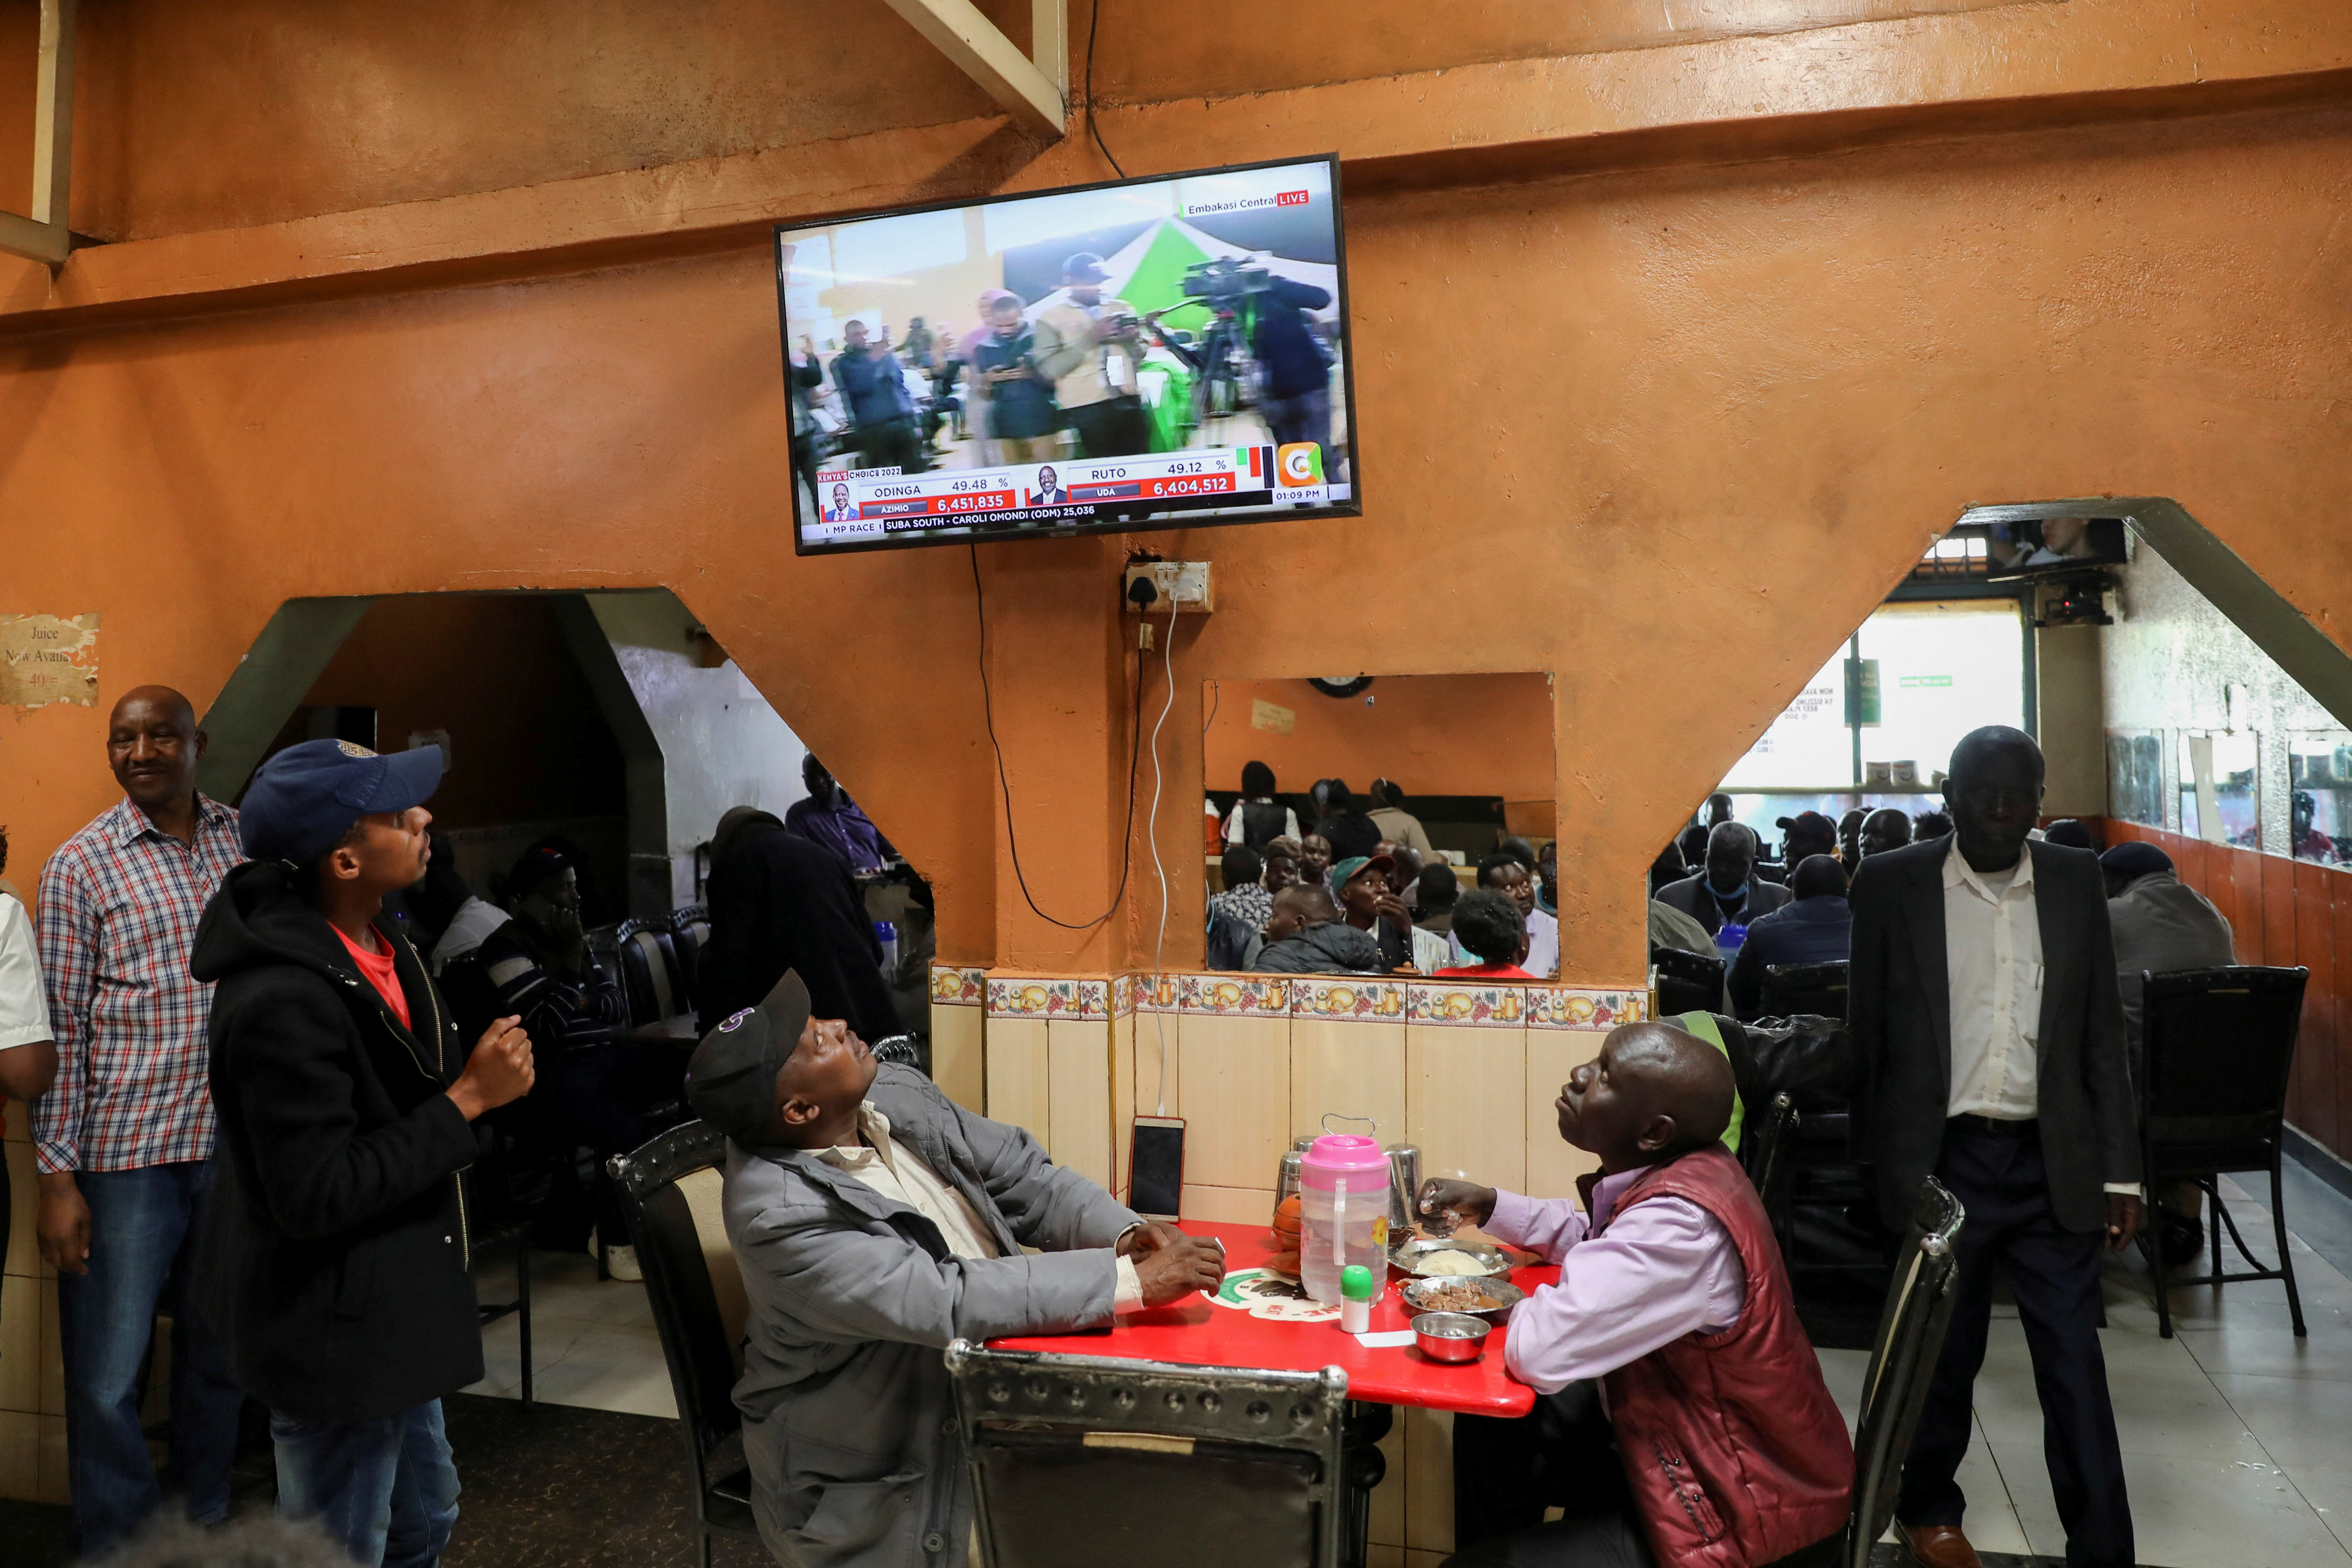 Kenyans watch a television for election results at the Silverline Butchery restaurant in Eldoret